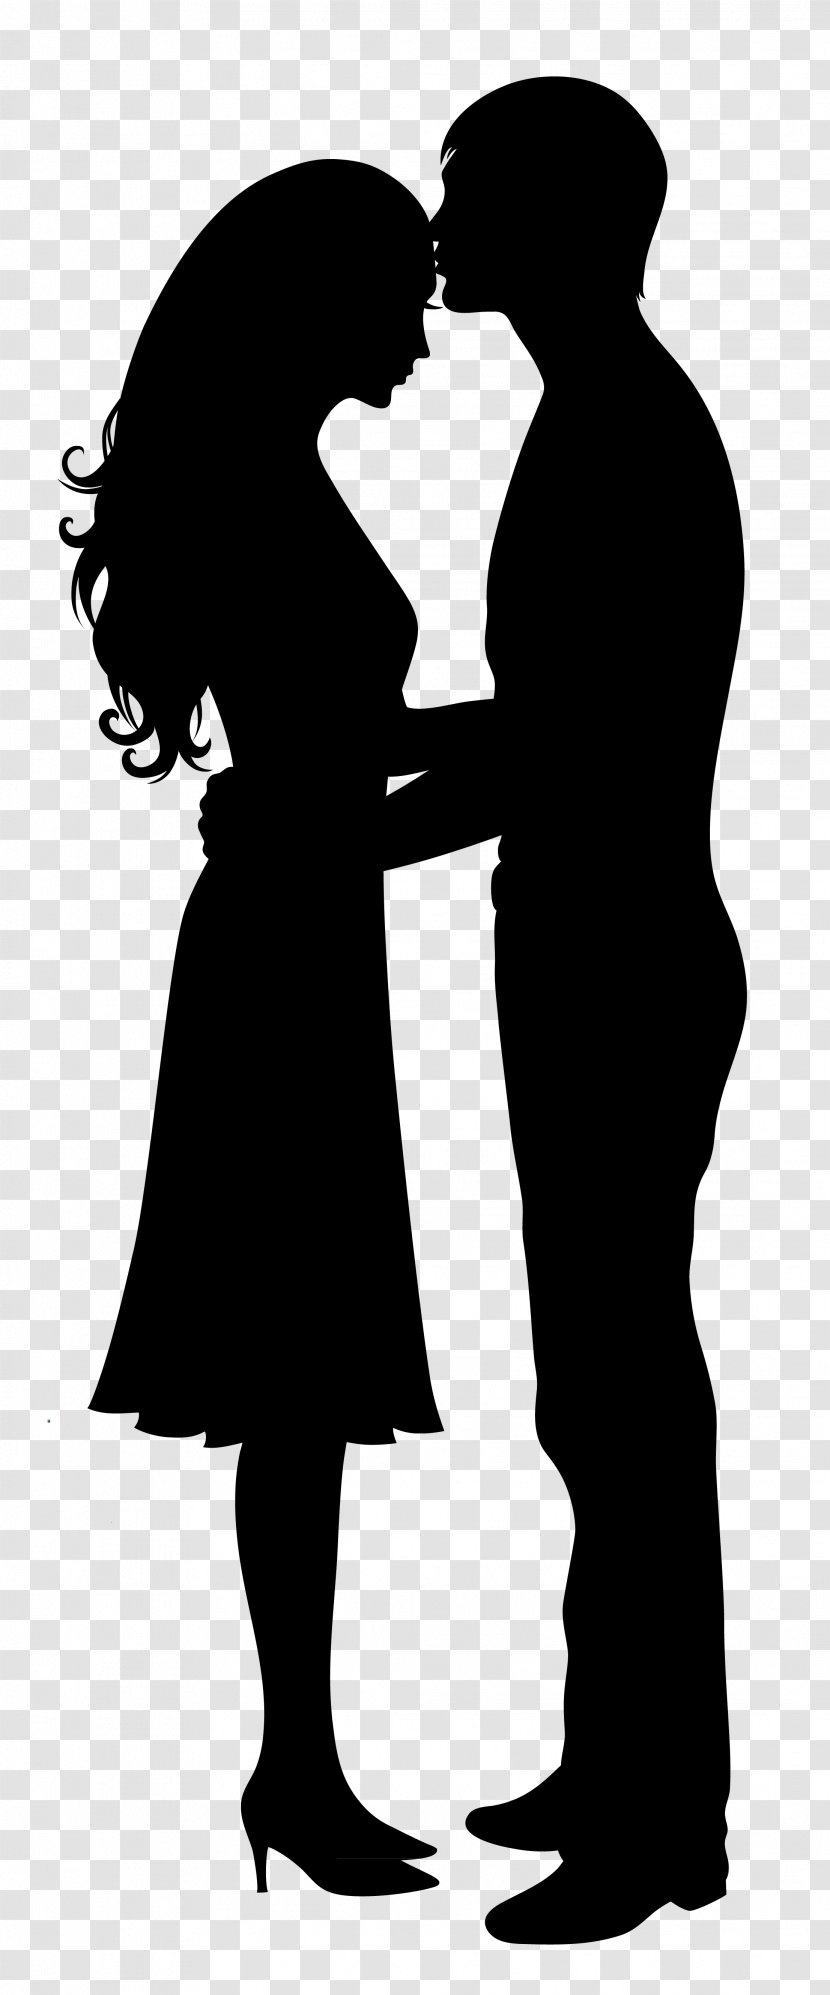 Silhouette Couple - Male - Figures Transparent PNG